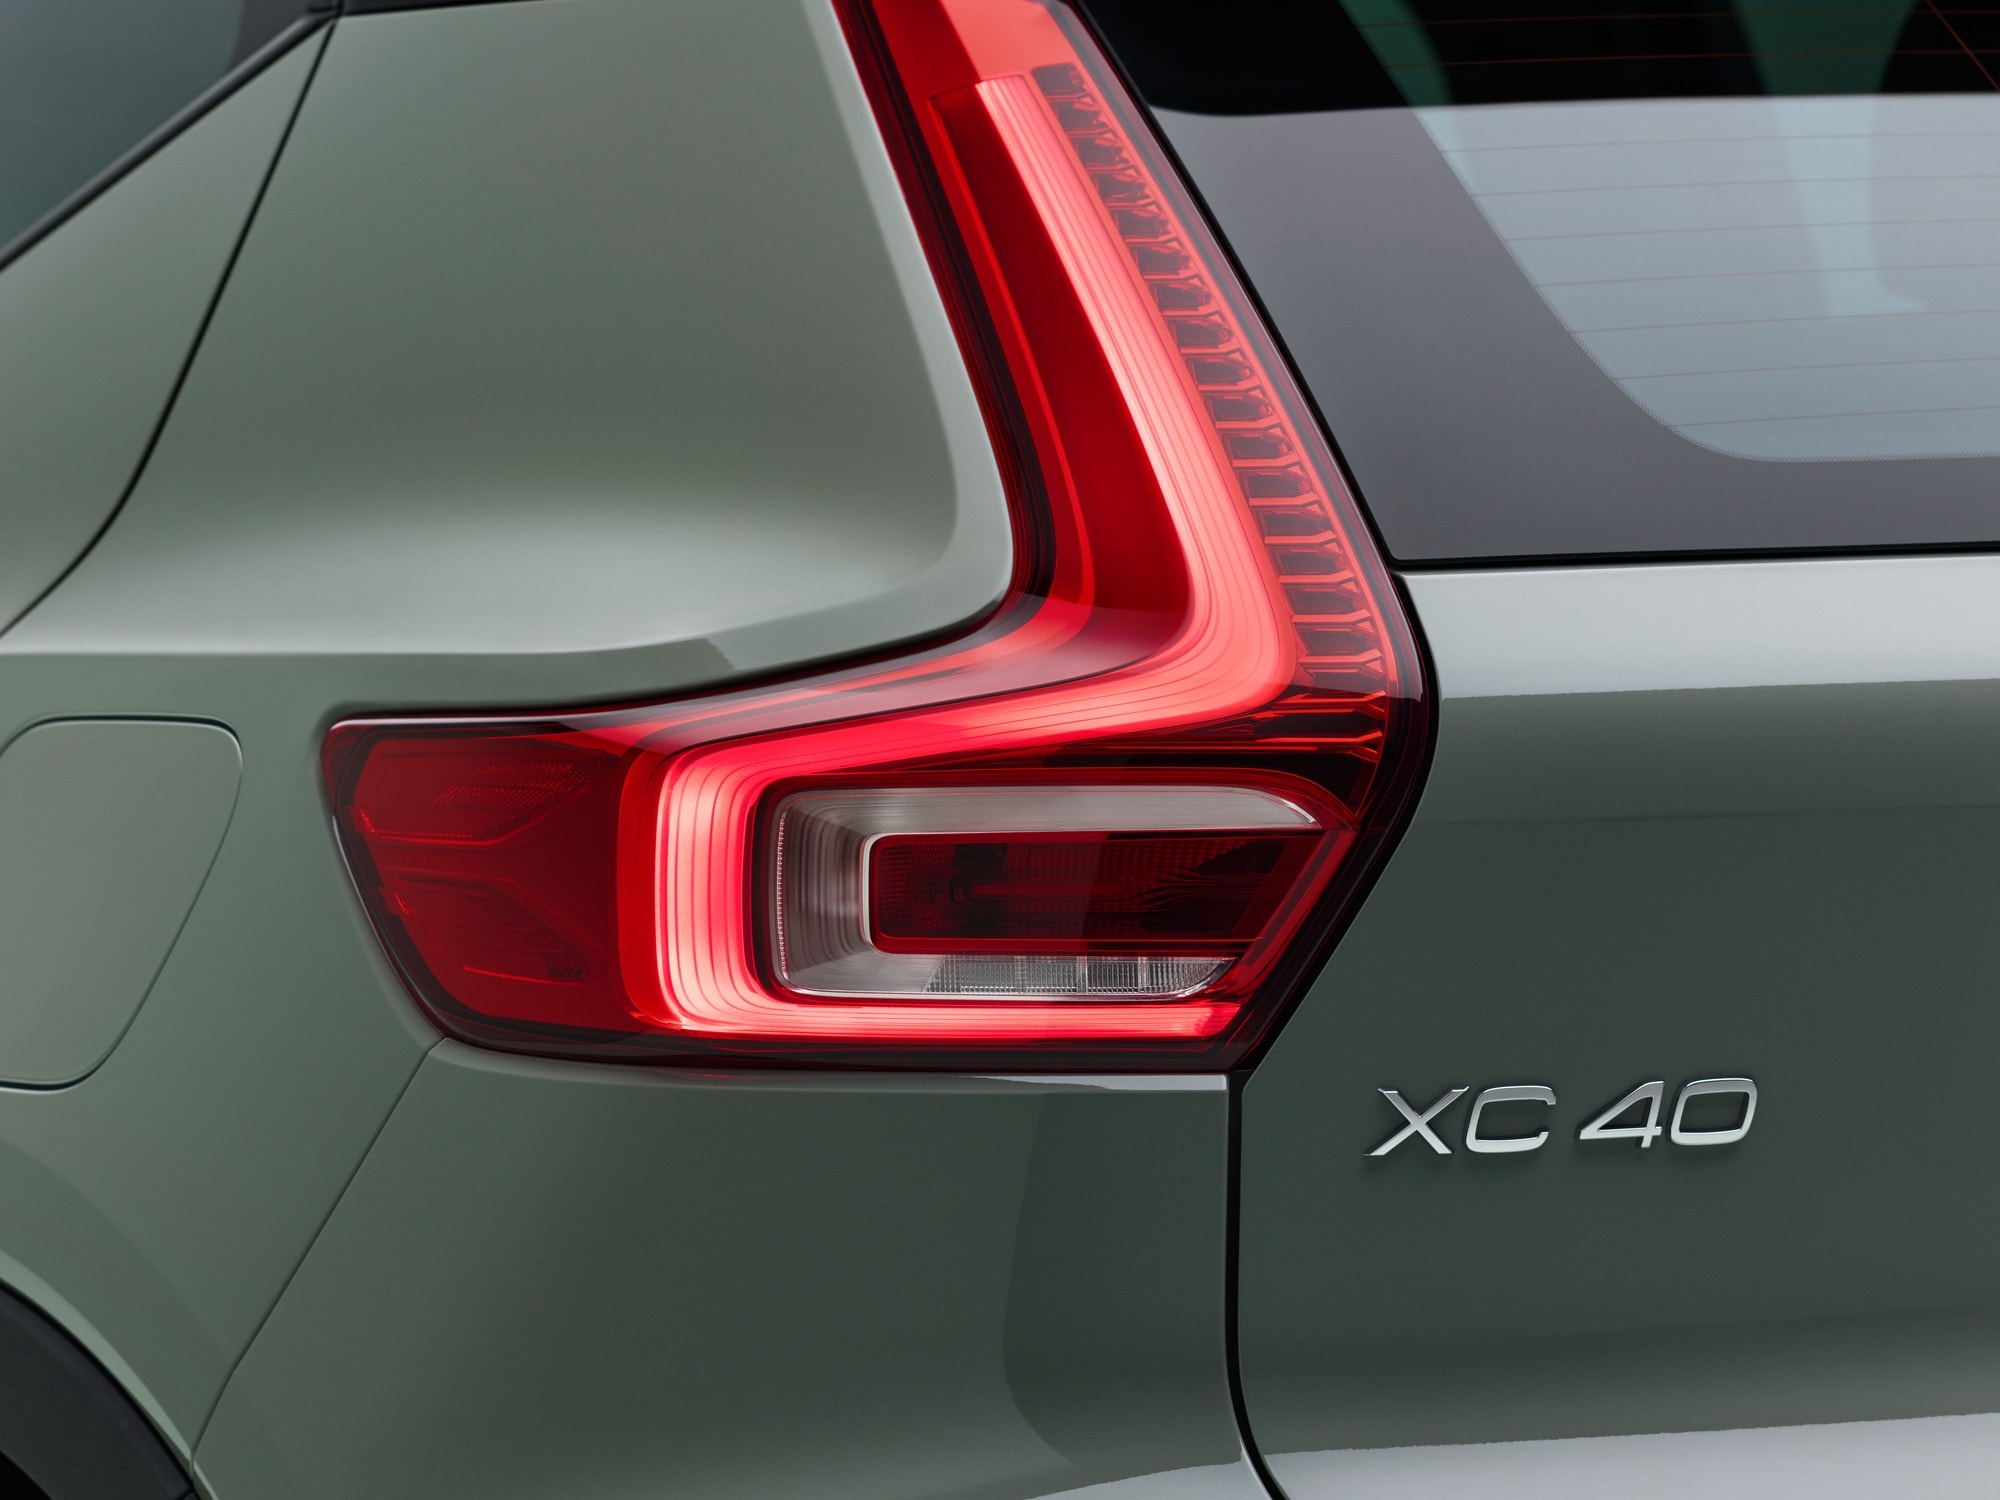 A close-up image of the front pixel headlights of the Volvo XC40 Recharge.